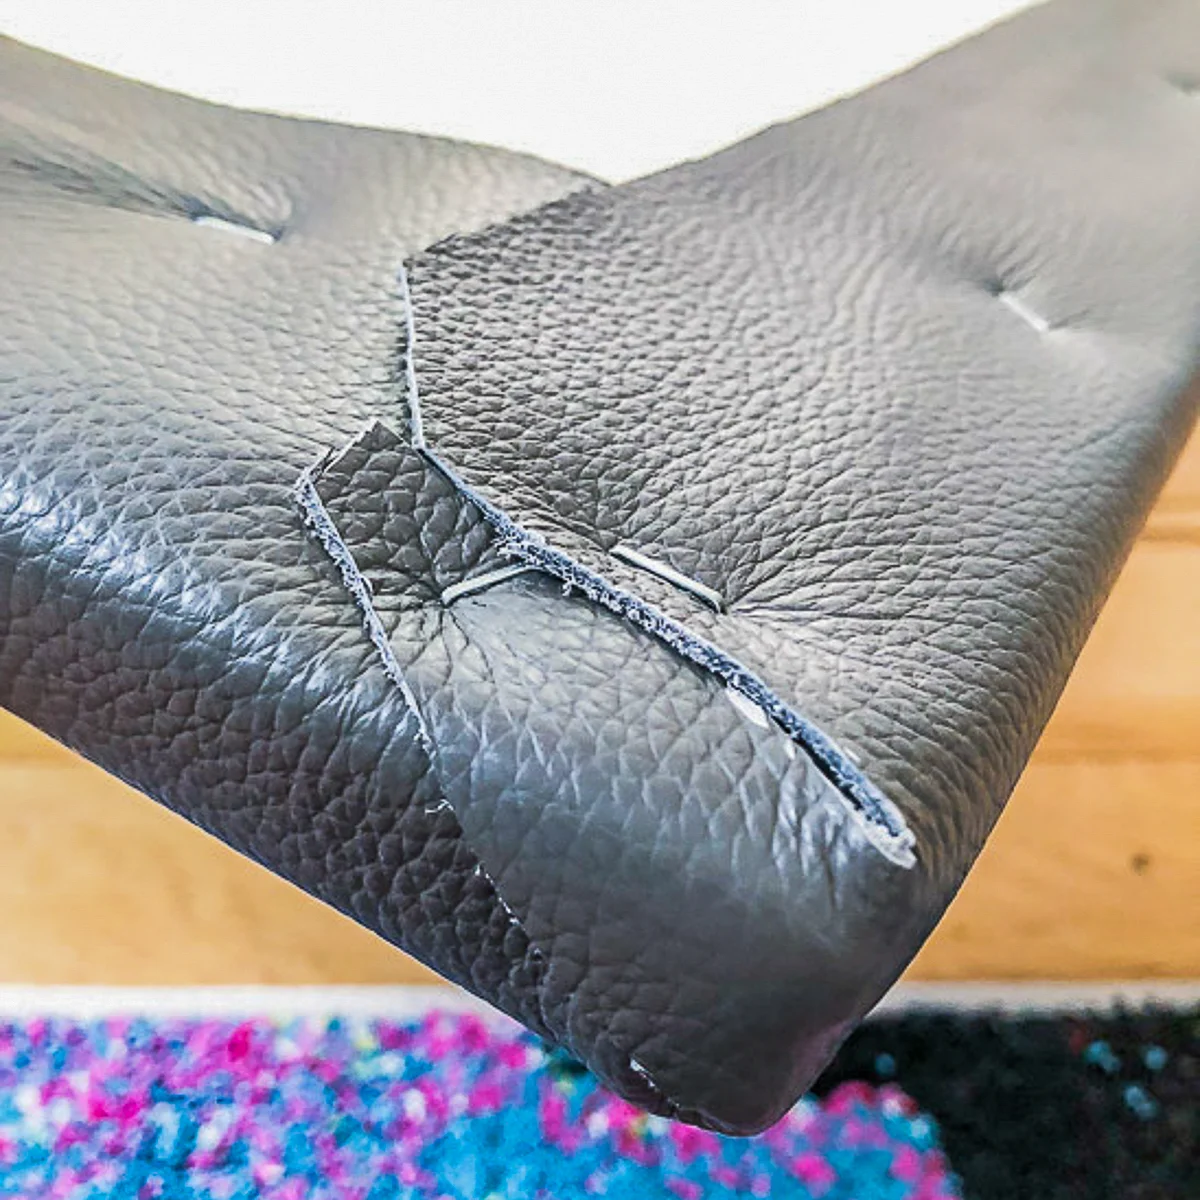 leather wrapped around corner of DIY bench cushion